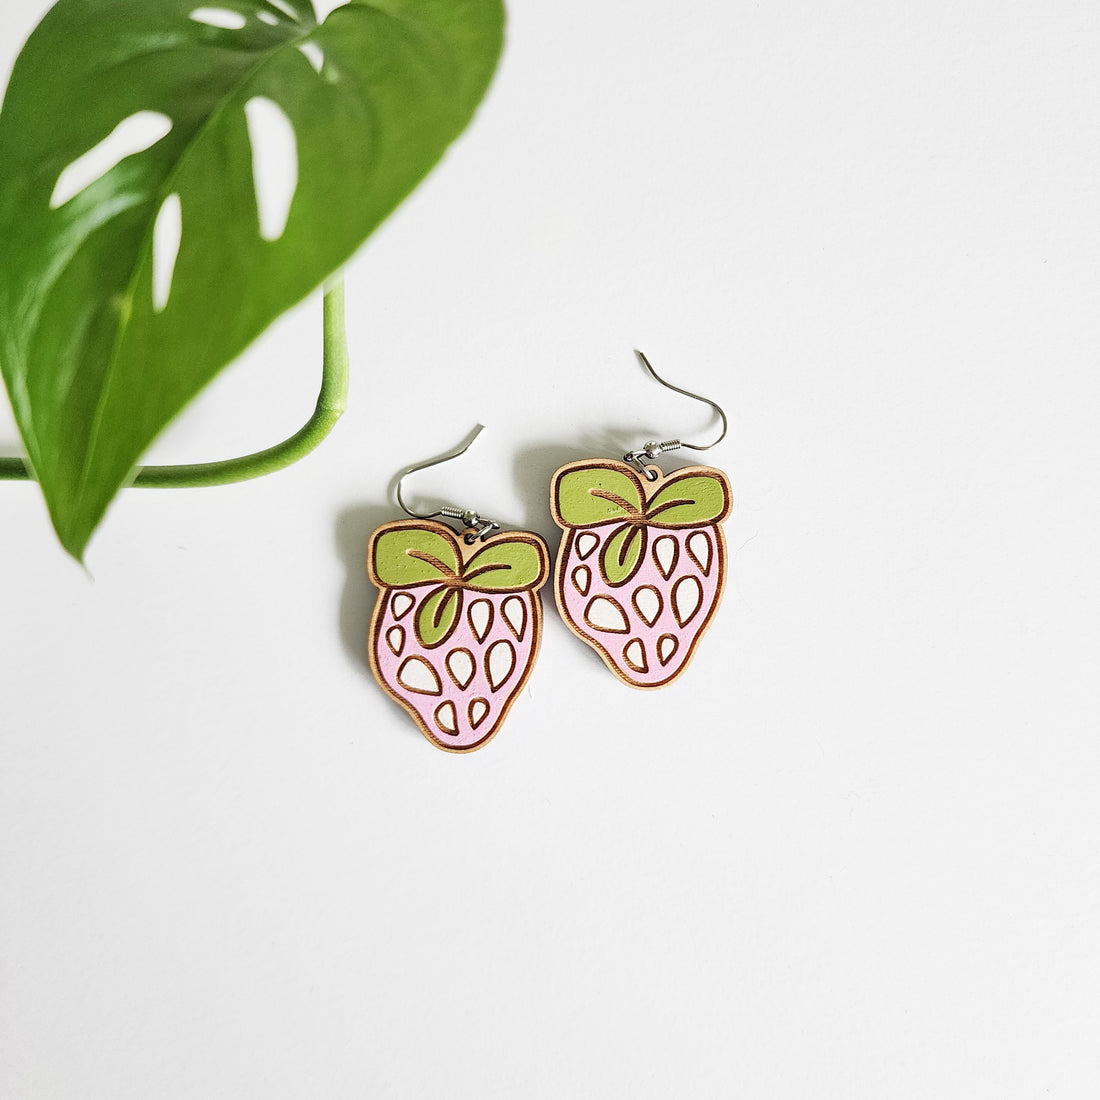 pair of strawberry earrings on white background next to a leaf